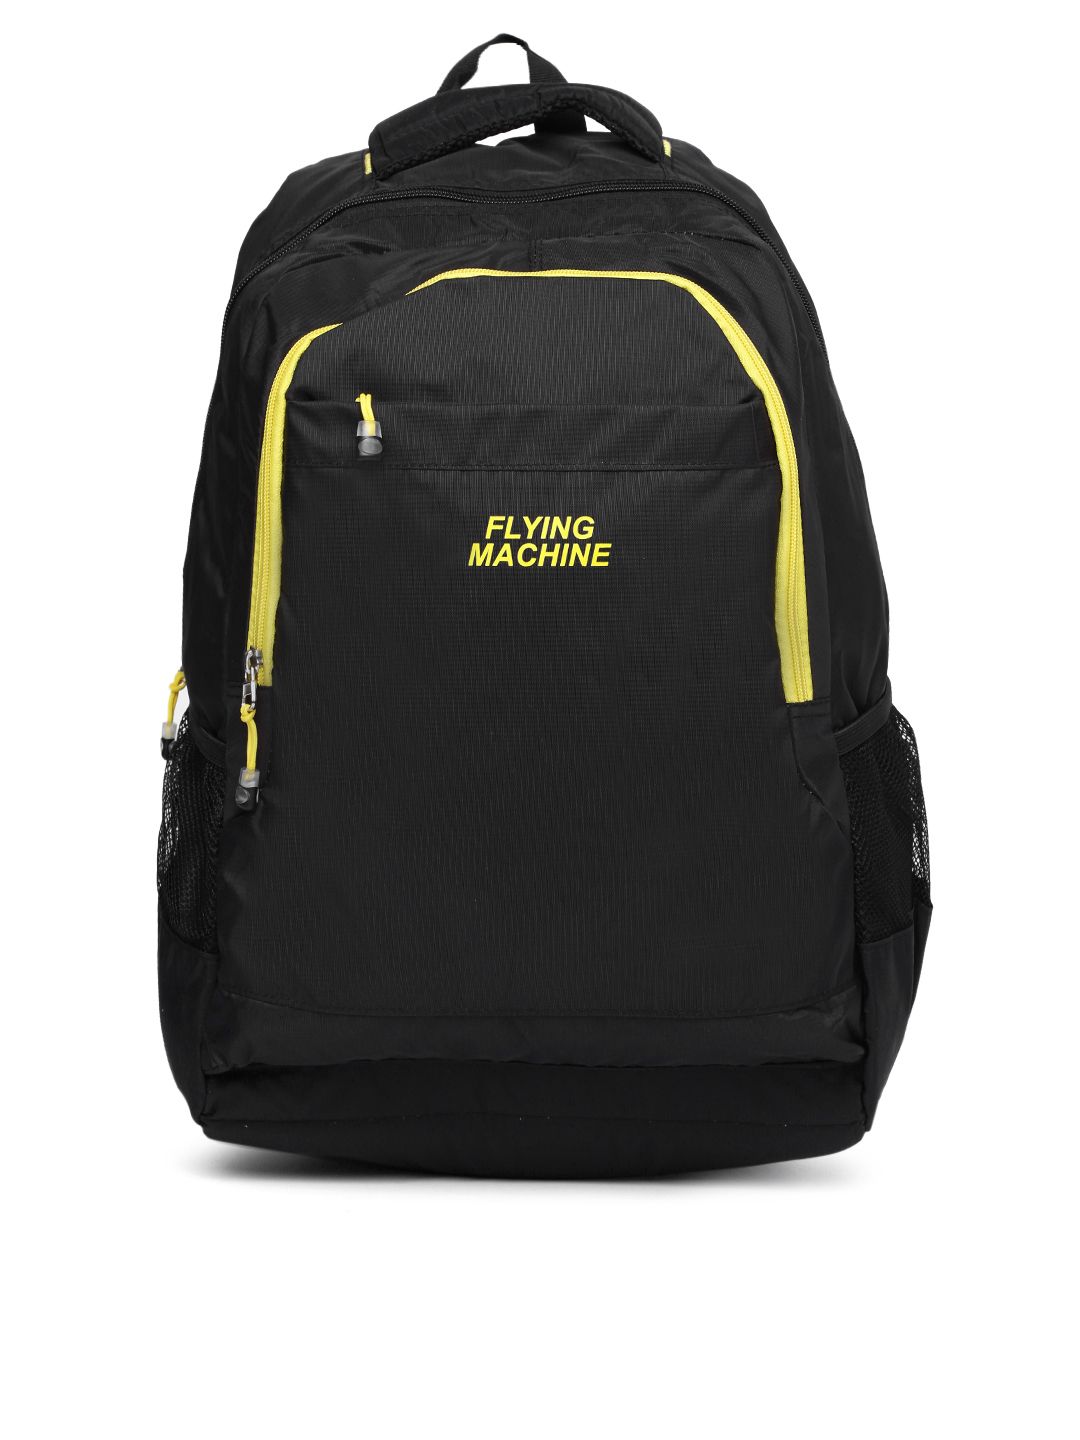 Flying Machine Unisex Black Laptop Backpack Price in India